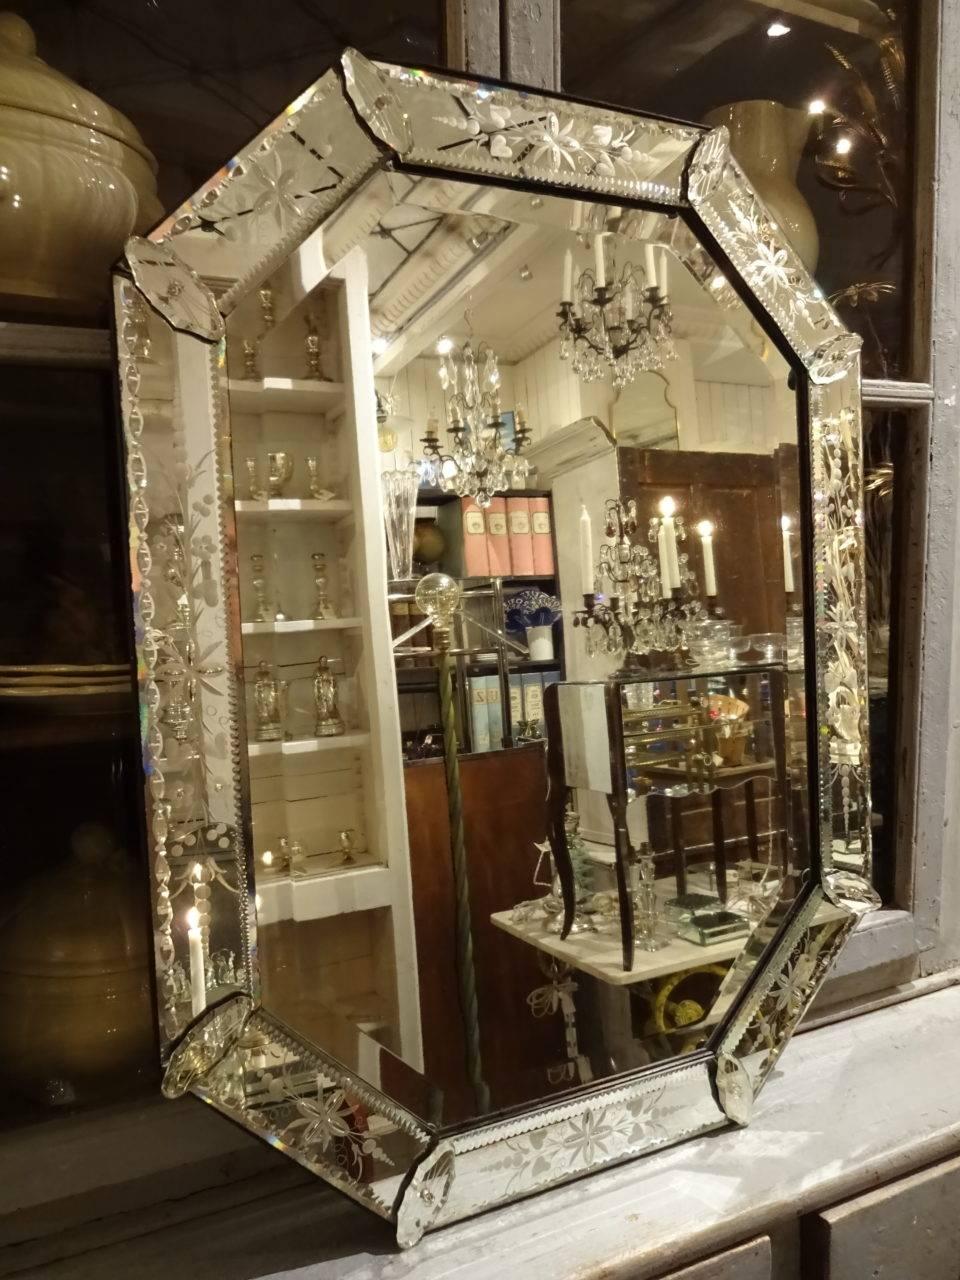 Gorgeous Venetian mirror from 1920s-1940s France, with fabulous cut mirrored glass and etchings.